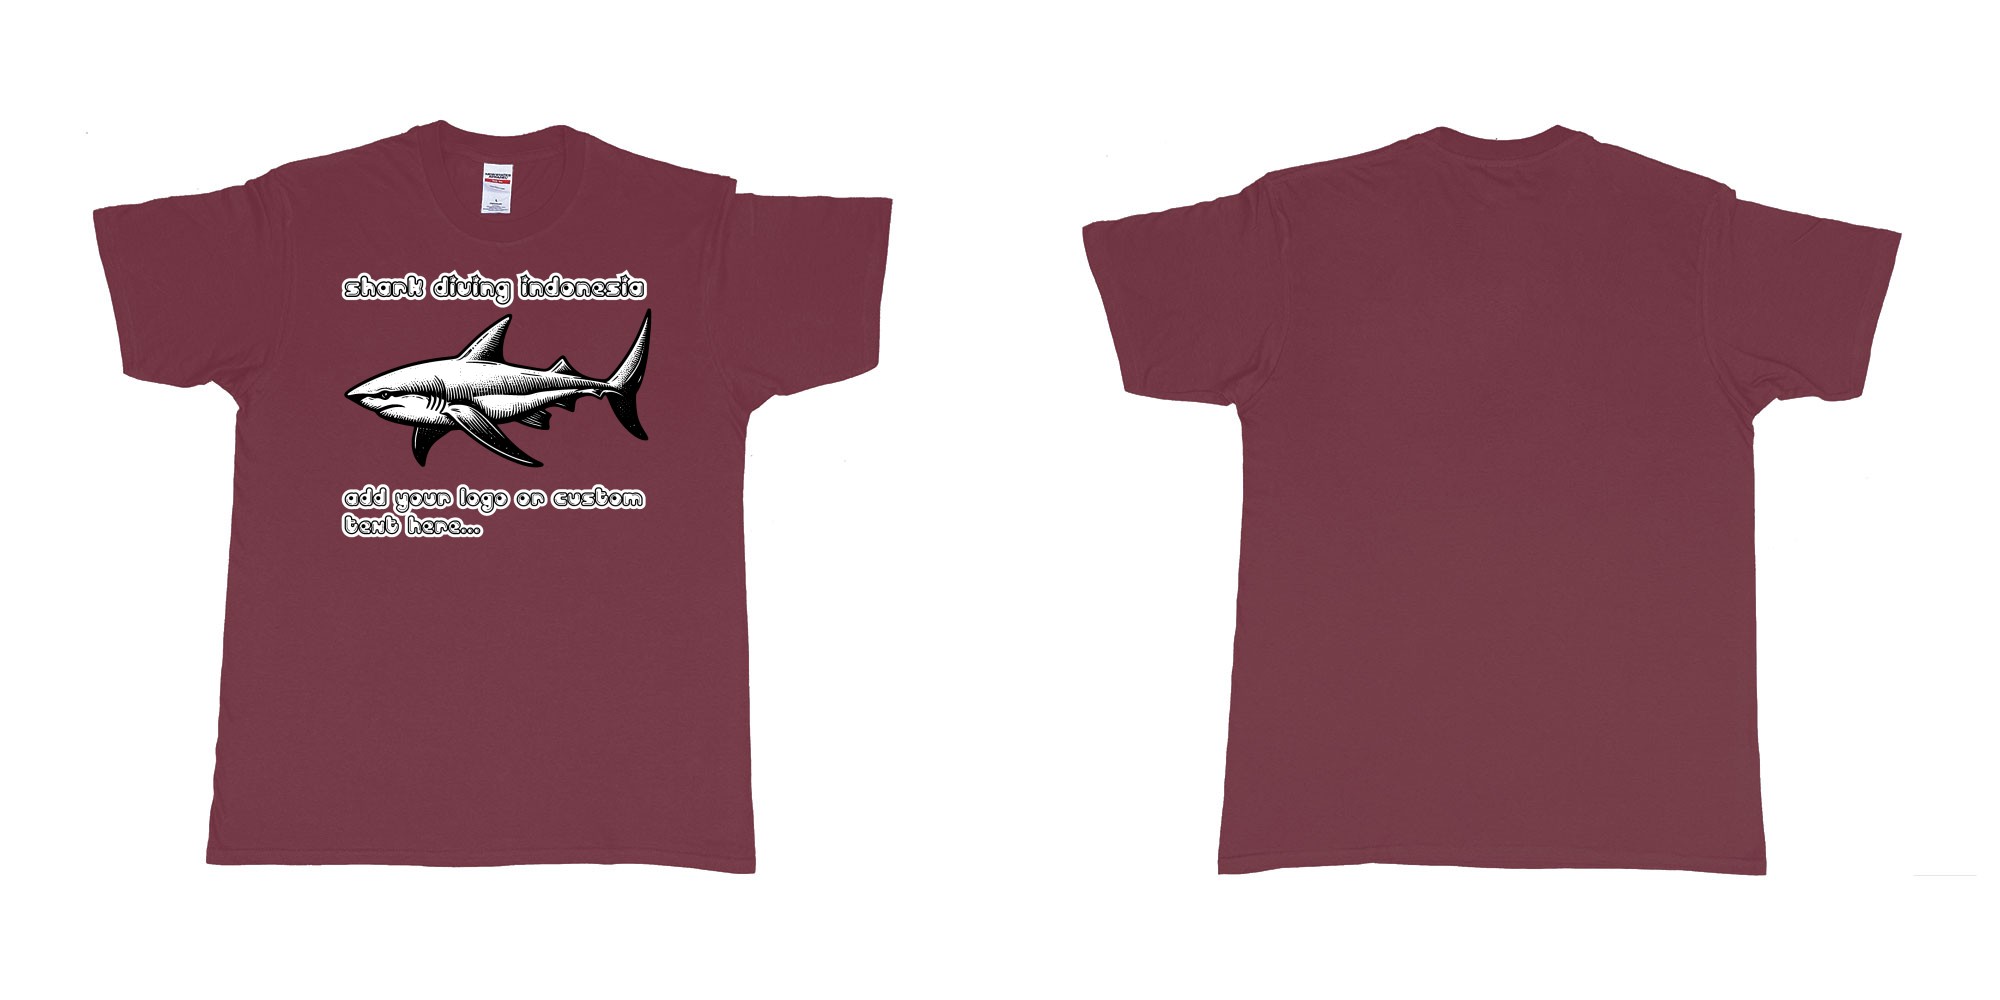 Custom tshirt design shark diving indonesia add own logo text tshirt print in fabric color marron choice your own text made in Bali by The Pirate Way